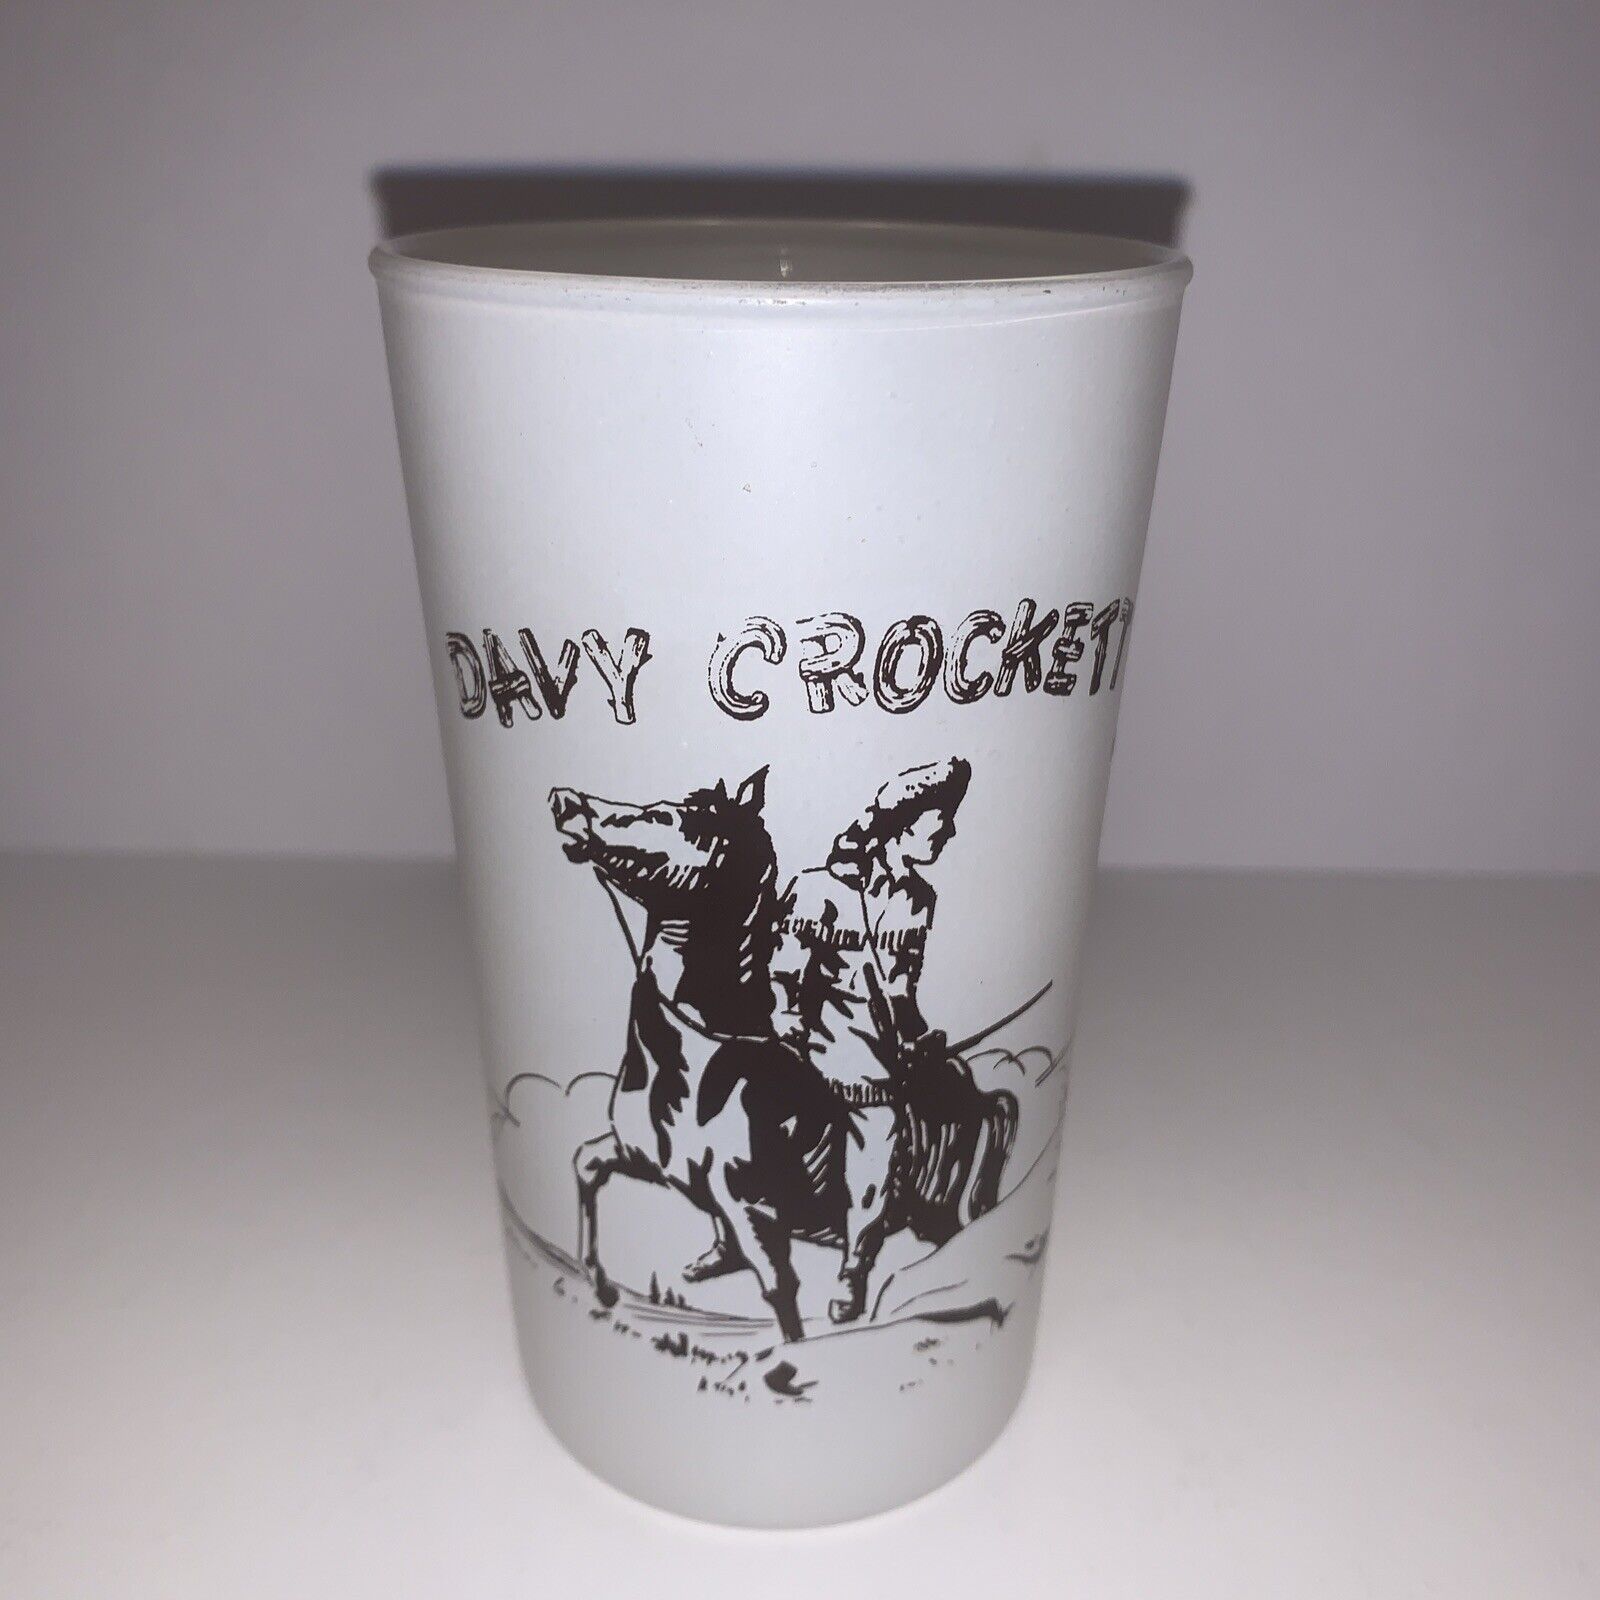 Vintage Sunoco Davy Crockett Glass Promo Advertising Frosted Harry’s Sunoco